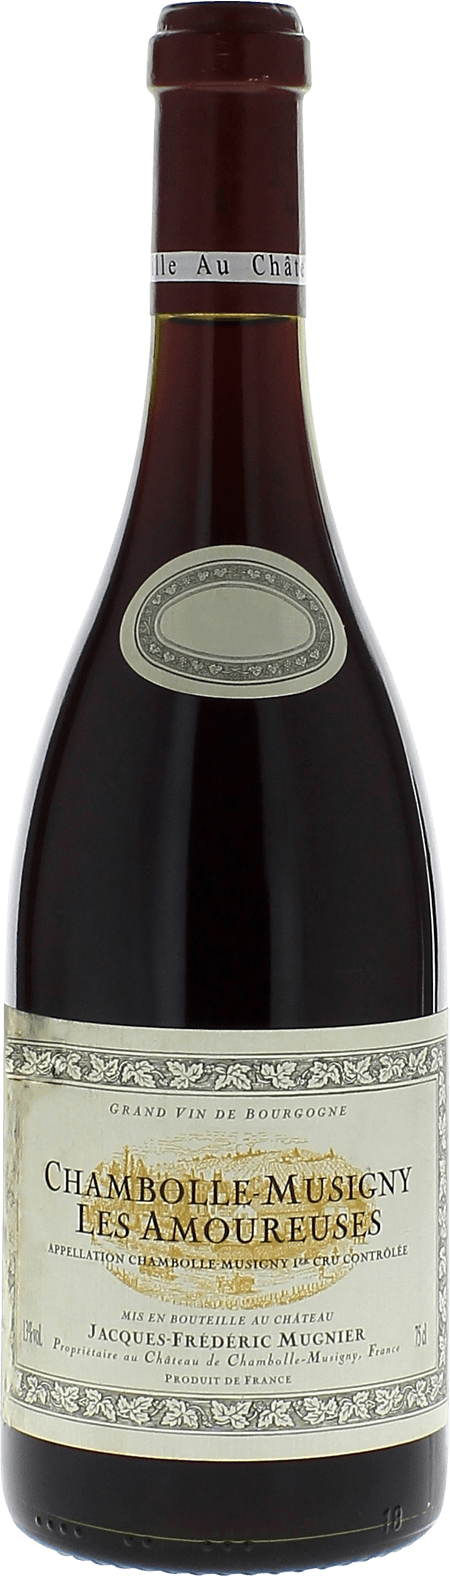 Chambolle musigny 1er cru les amoureuses 2017 Domaine MUGNIER Jacques Frederic, Bourgogne rouge